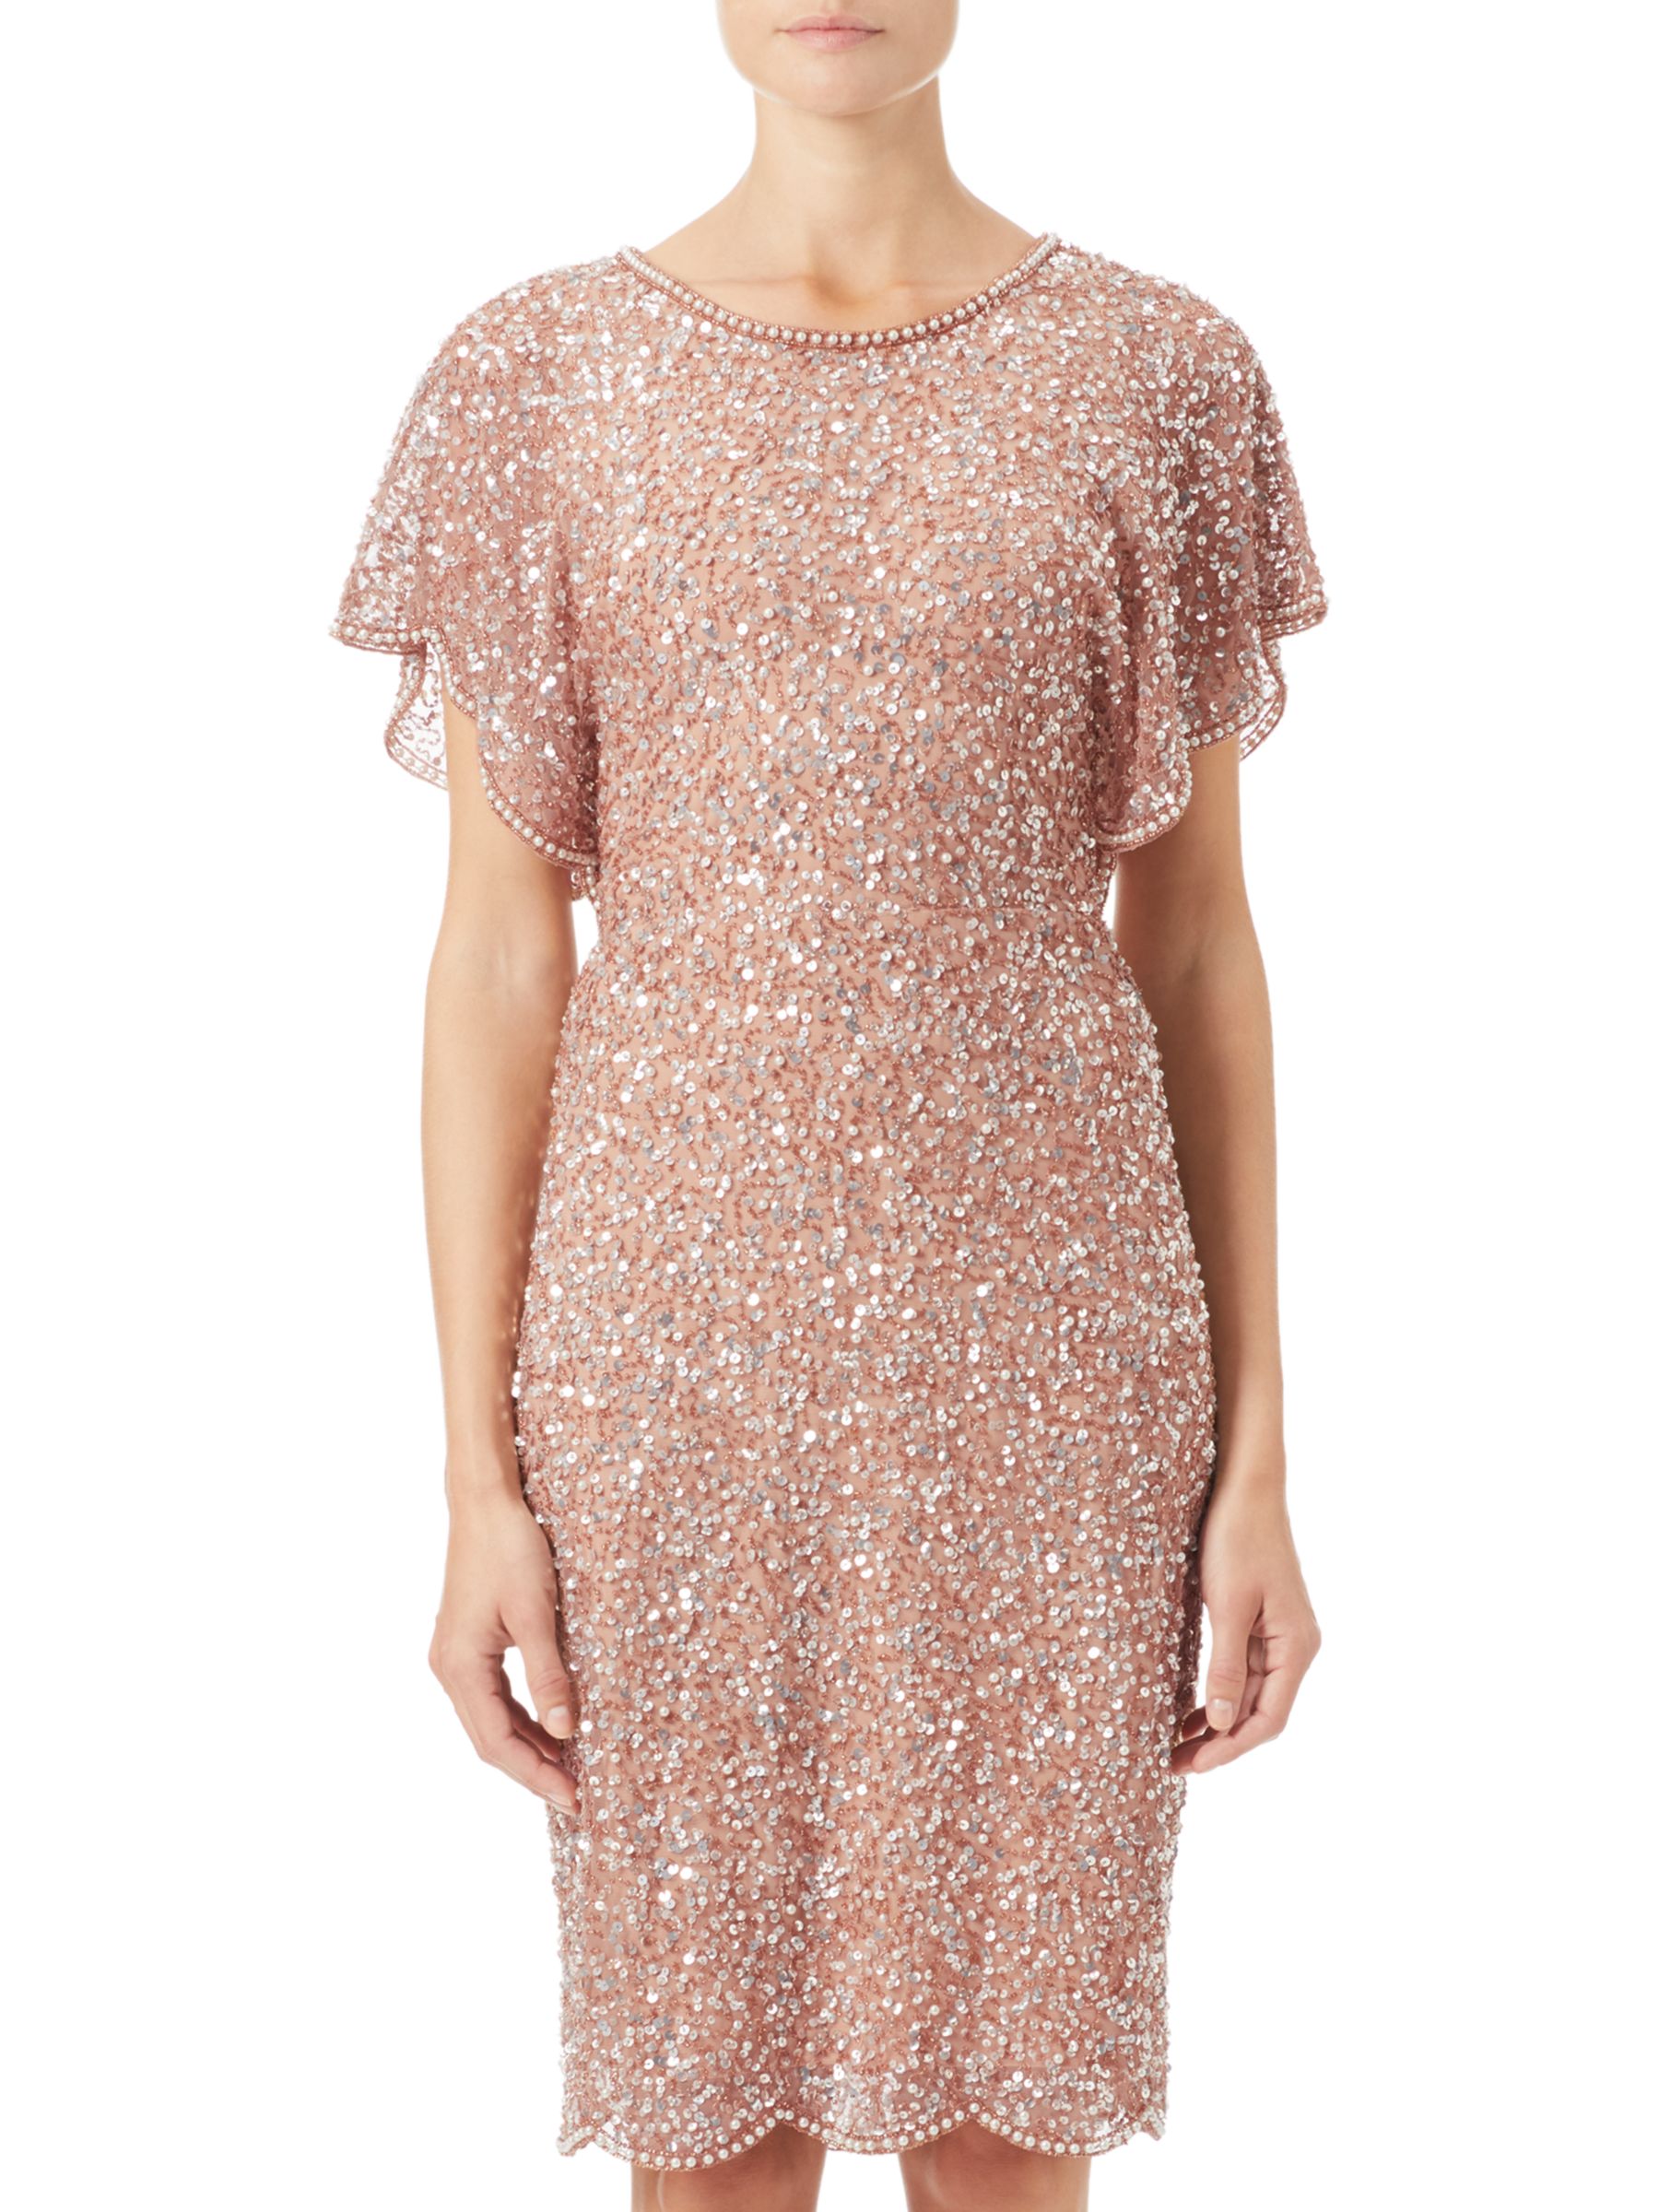 adrianna papell rose gold dress